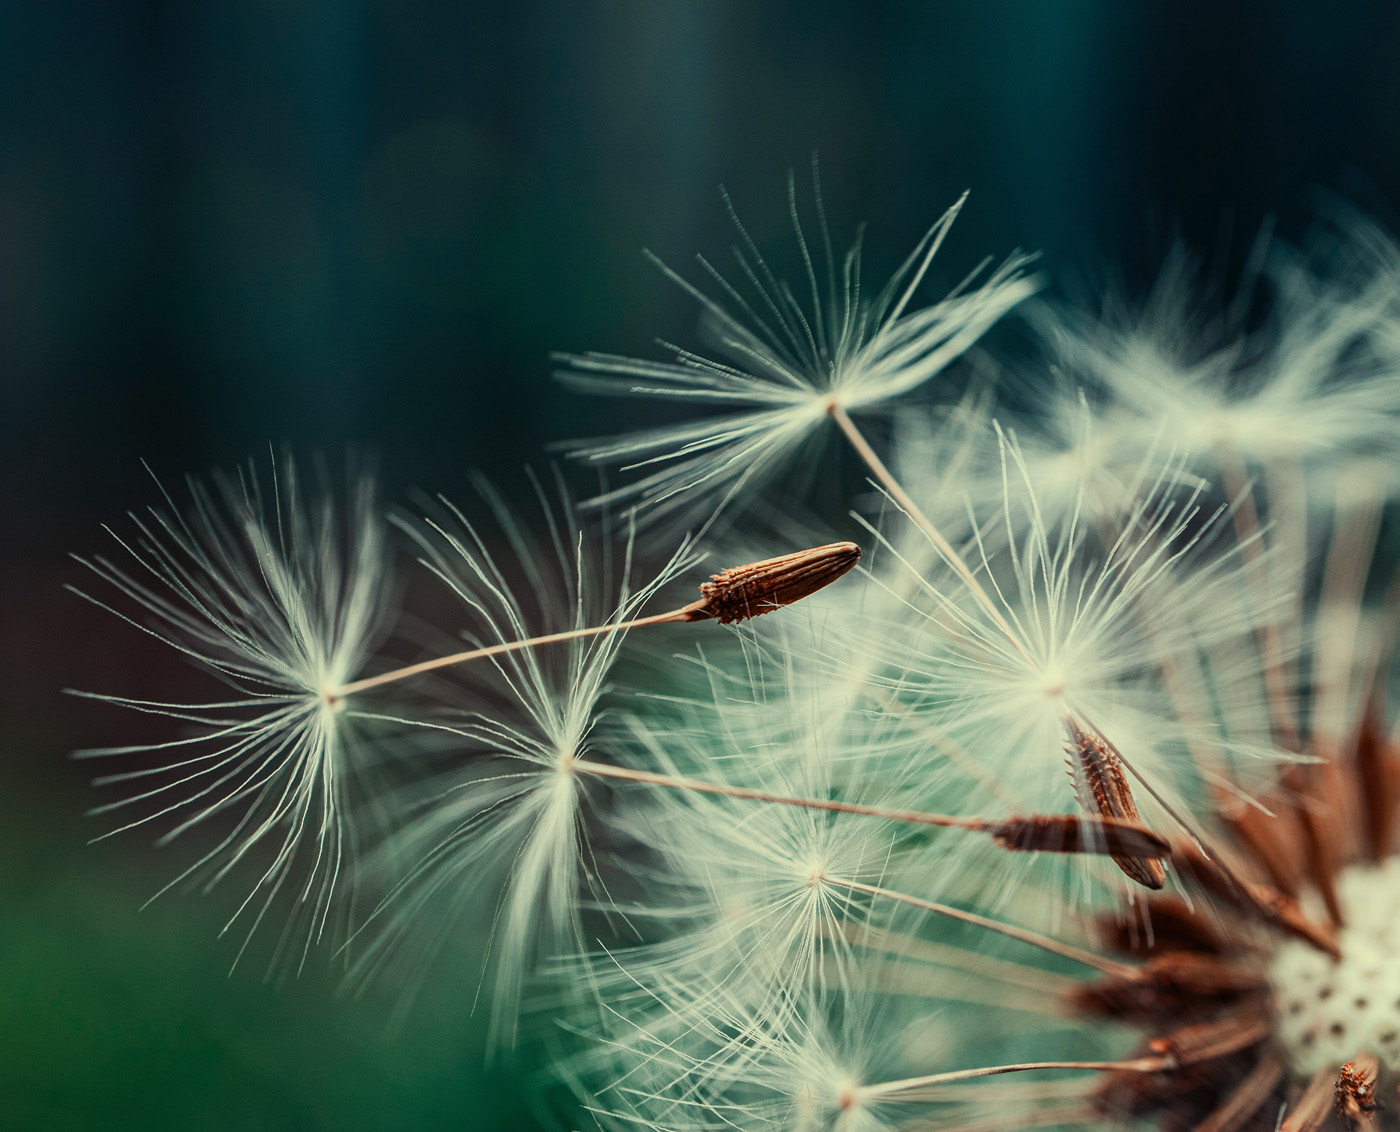 Dandelion: A Common Backyard Weed That Tackles Spike Proteins, Liver Troubles, Cancer, and More!